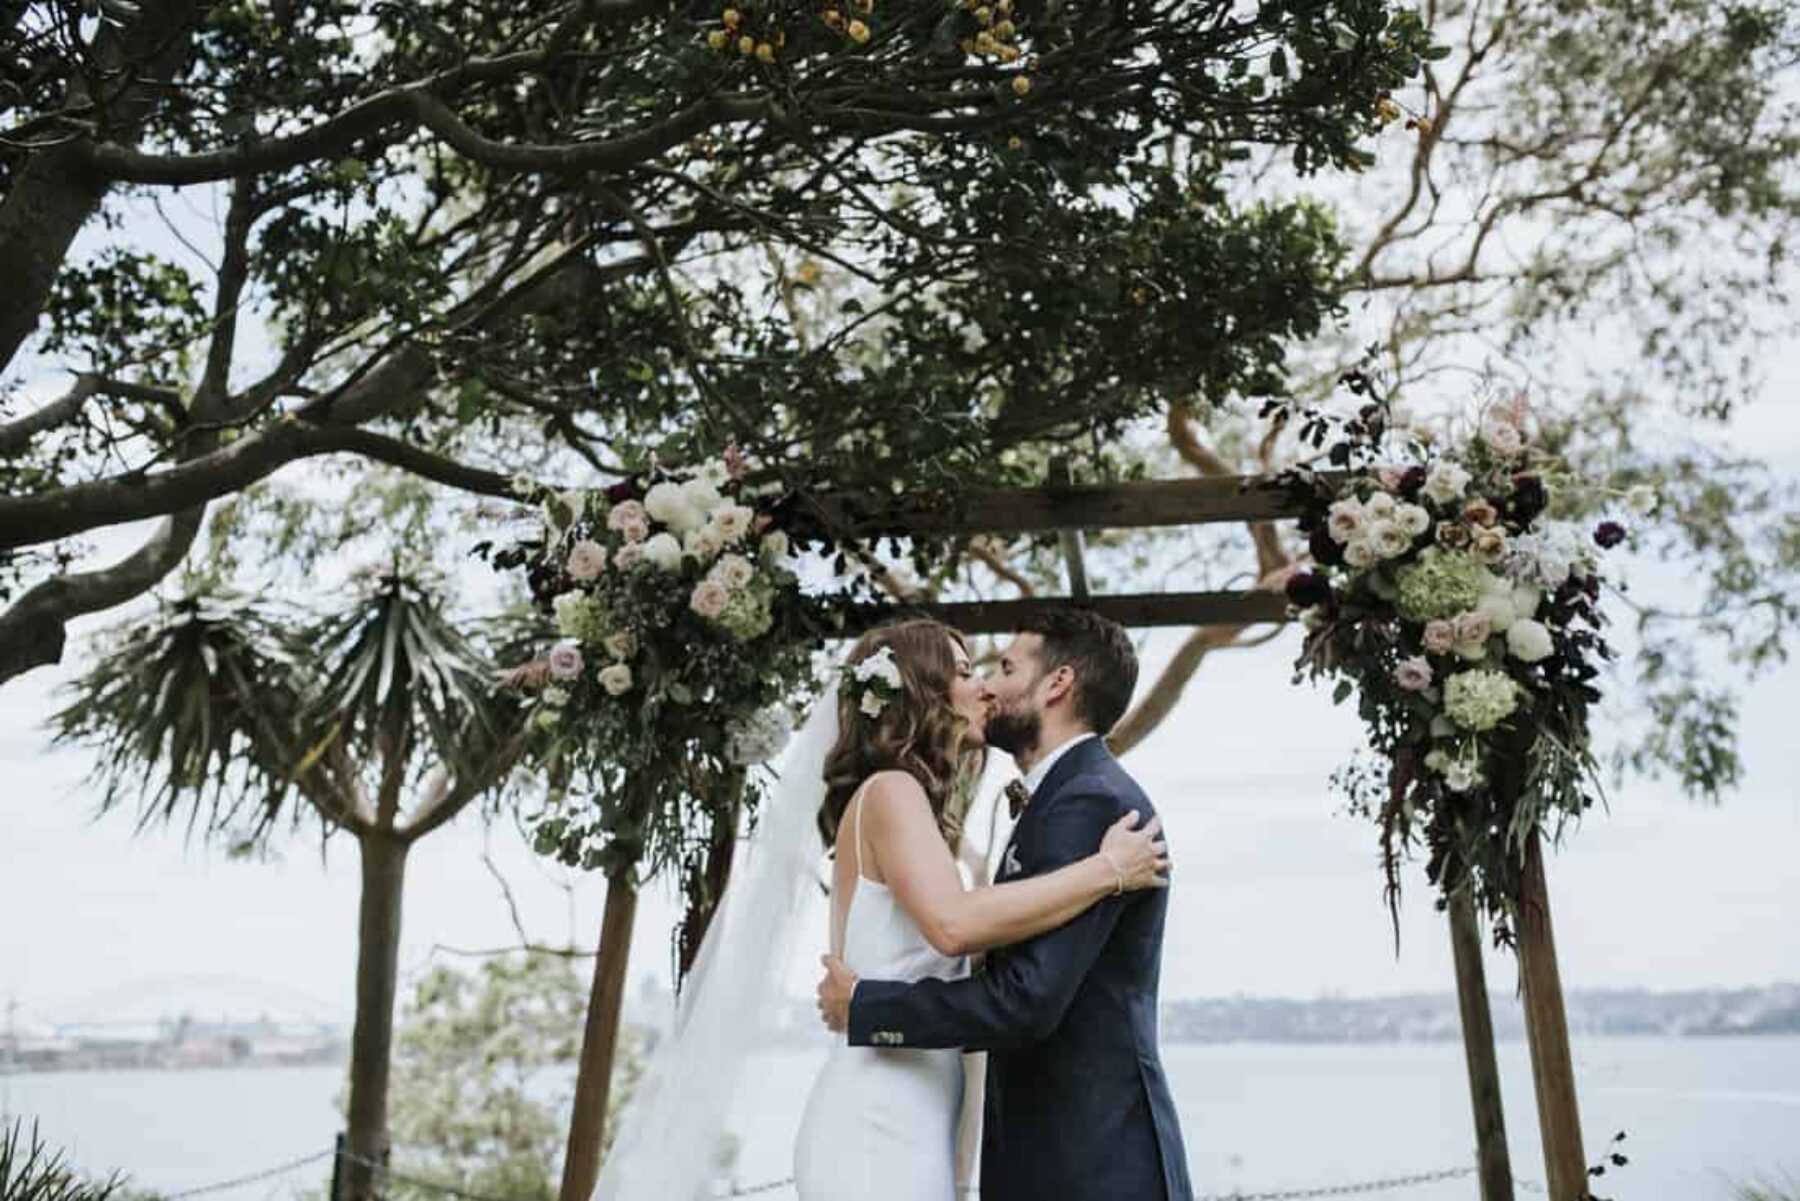 floral wedding arch in muted tones